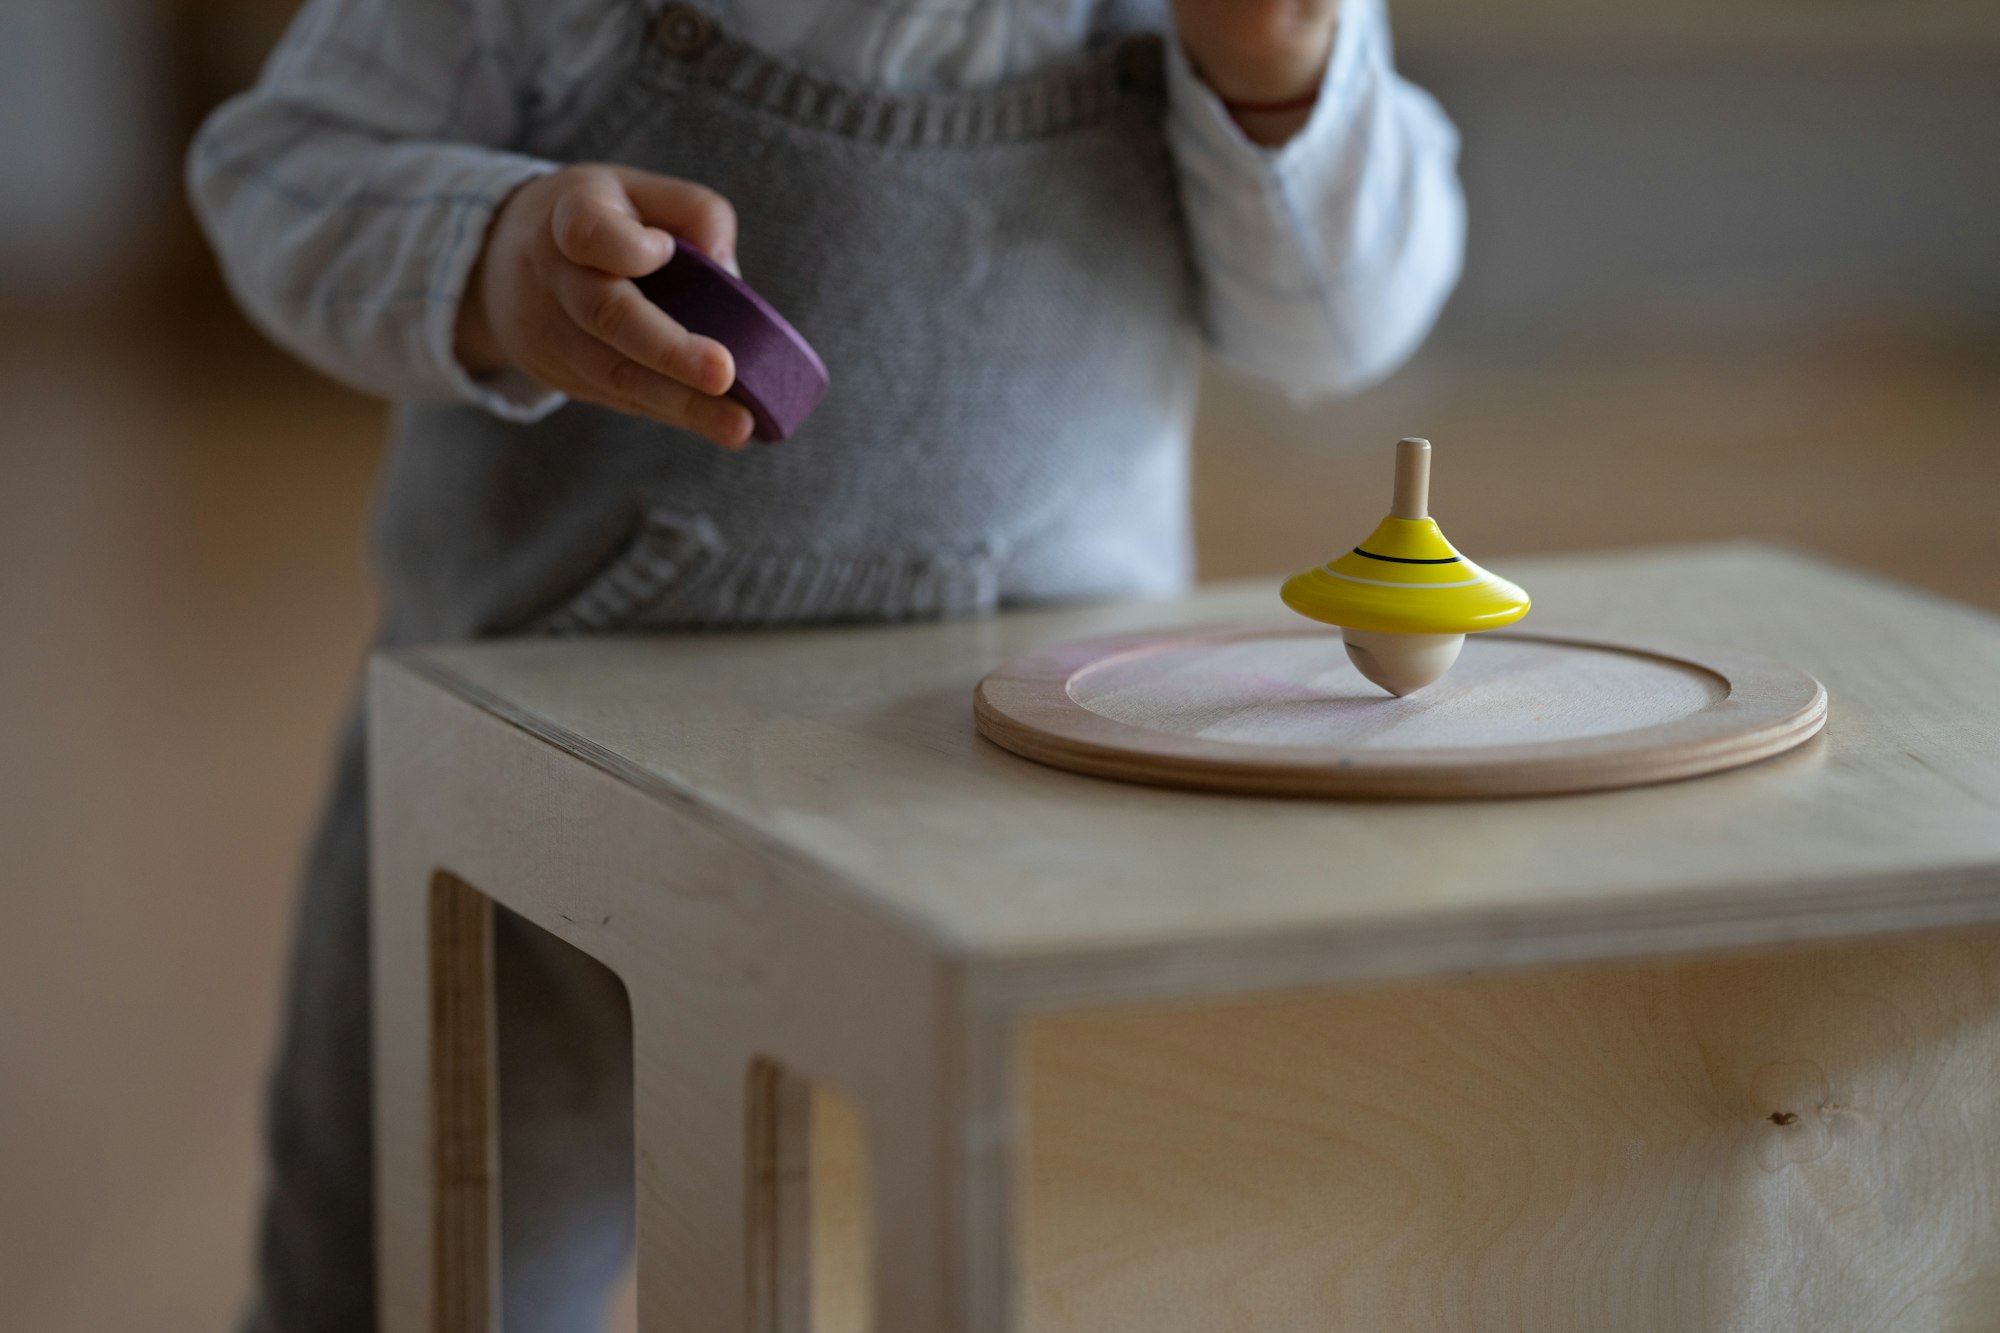 A cute baby discovers and plays in a Montessori nest.